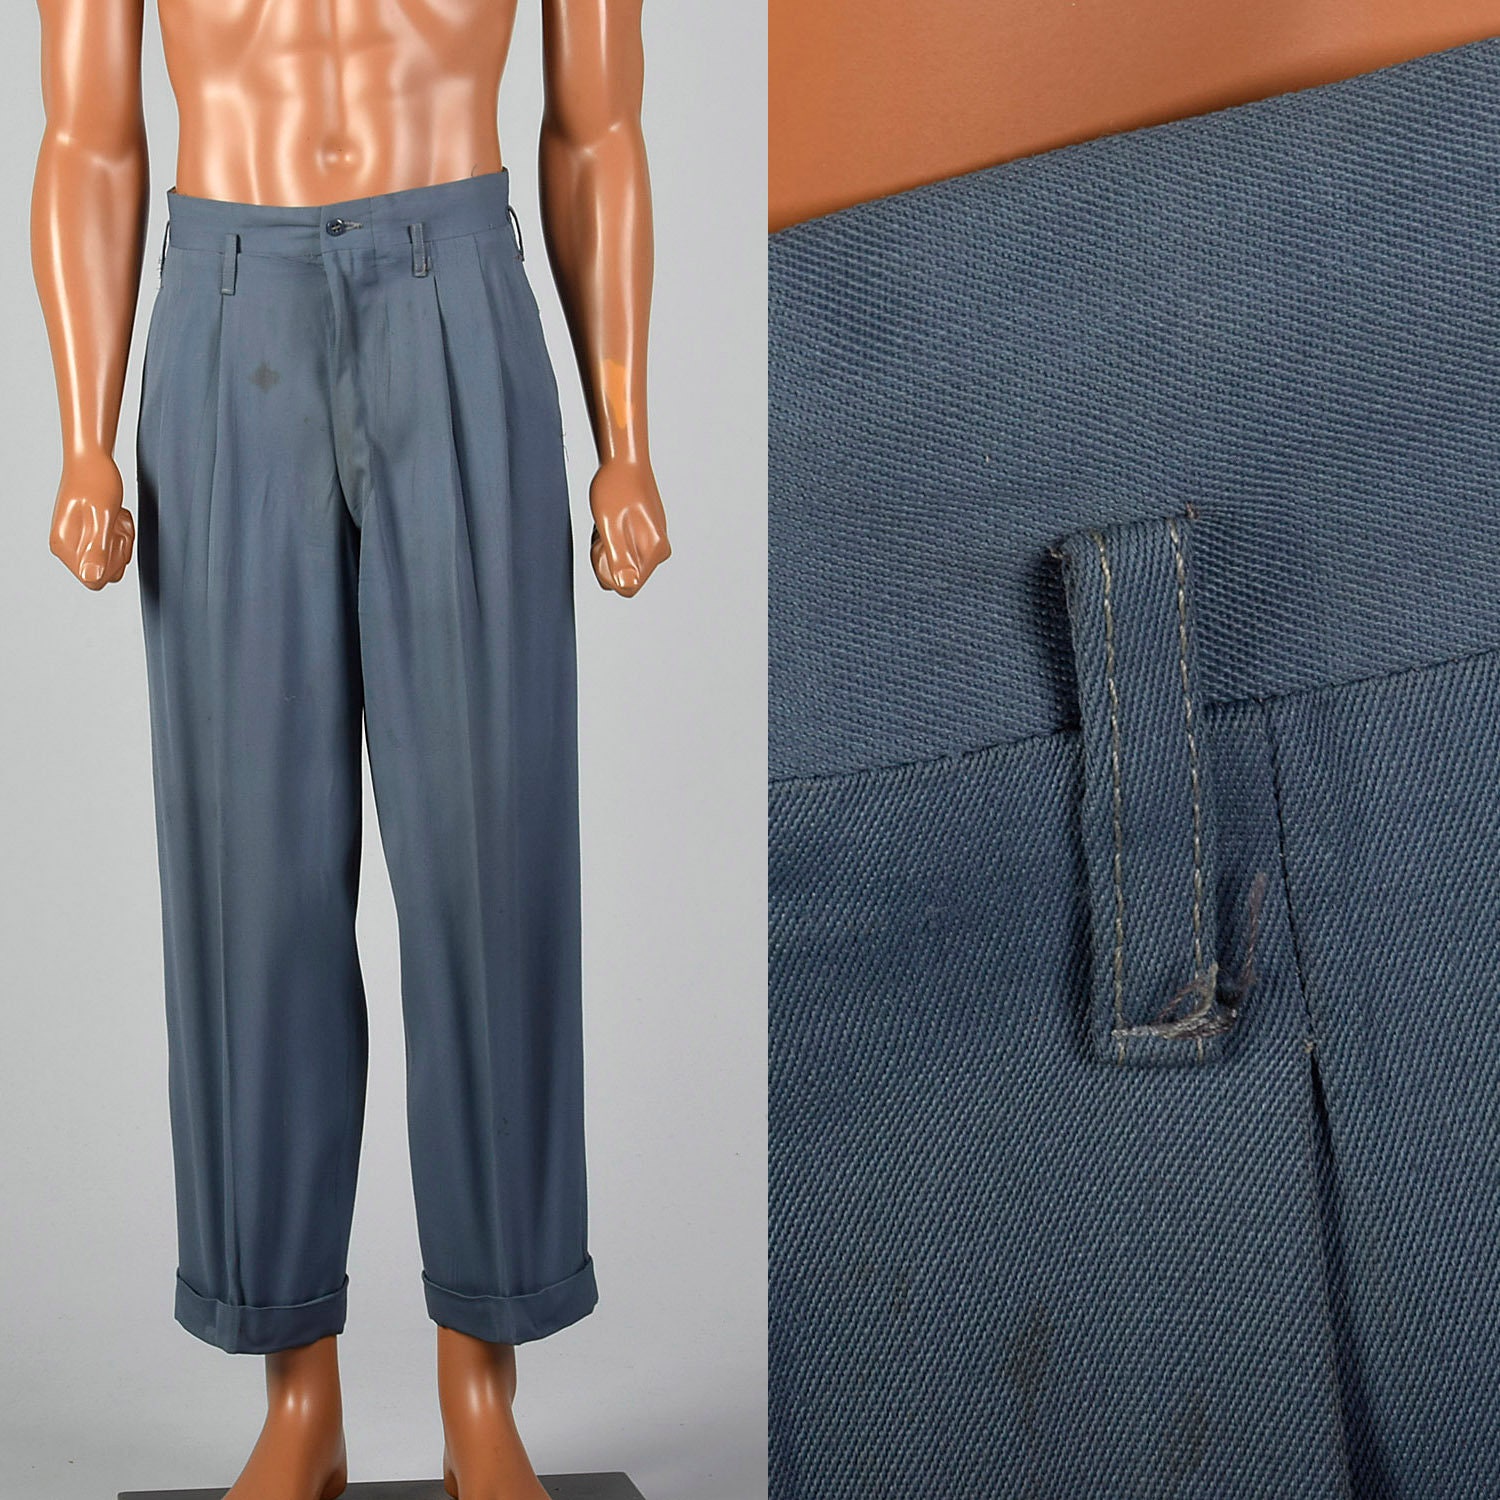 Shop Cuffed Trousers for Men from latest collection at Forever 21  330558